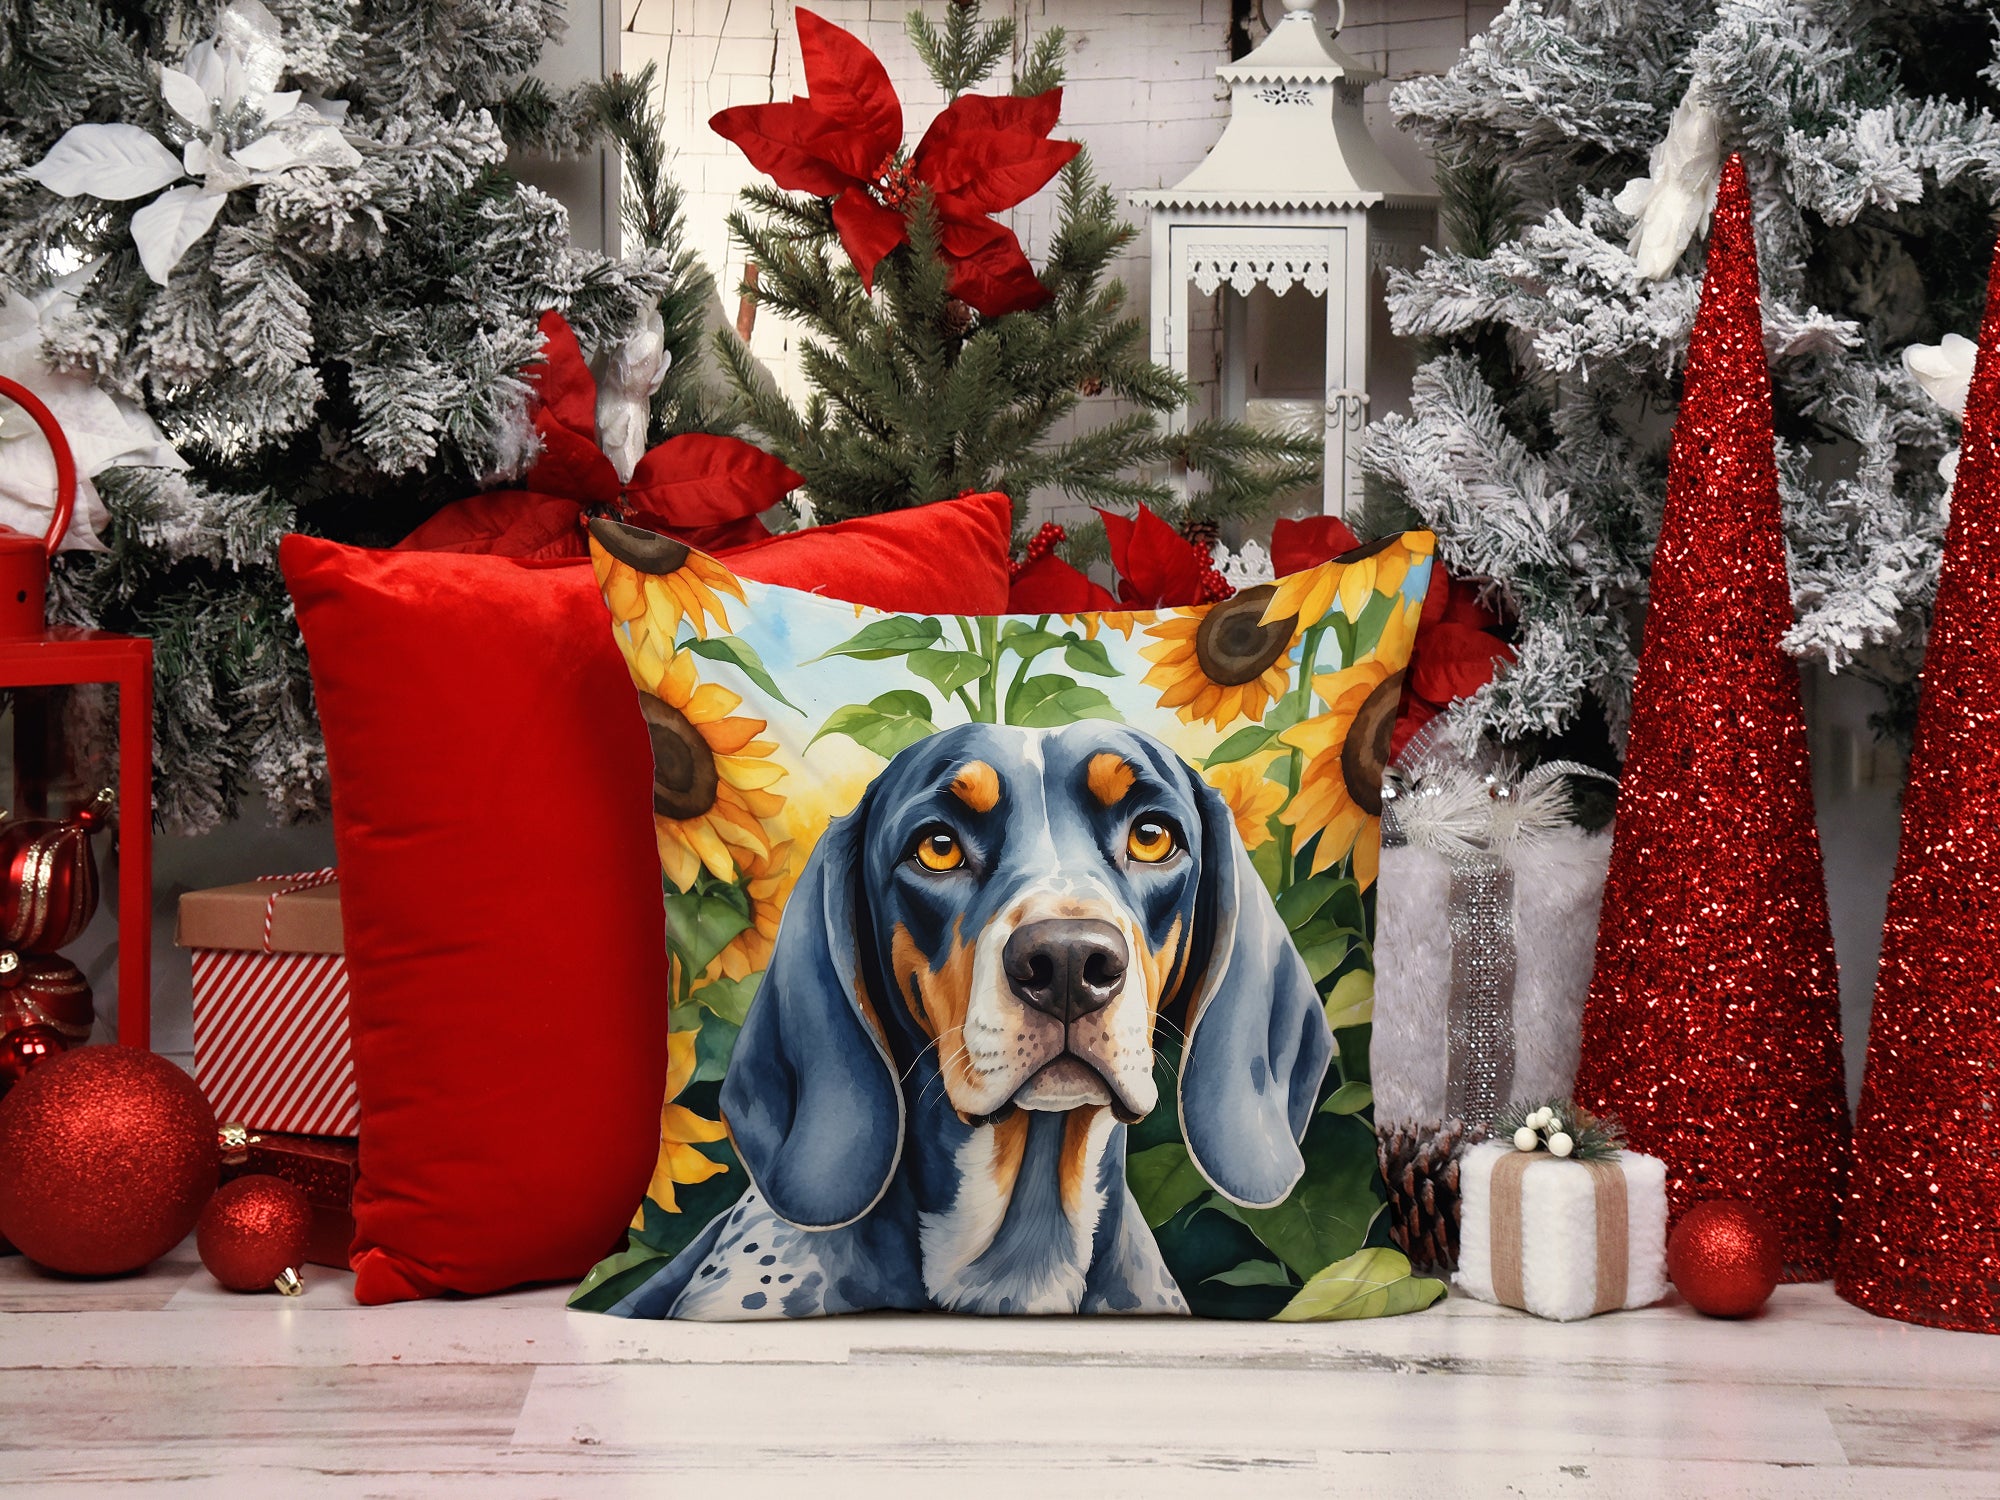 Bluetick Coonhound in Sunflowers Throw Pillow